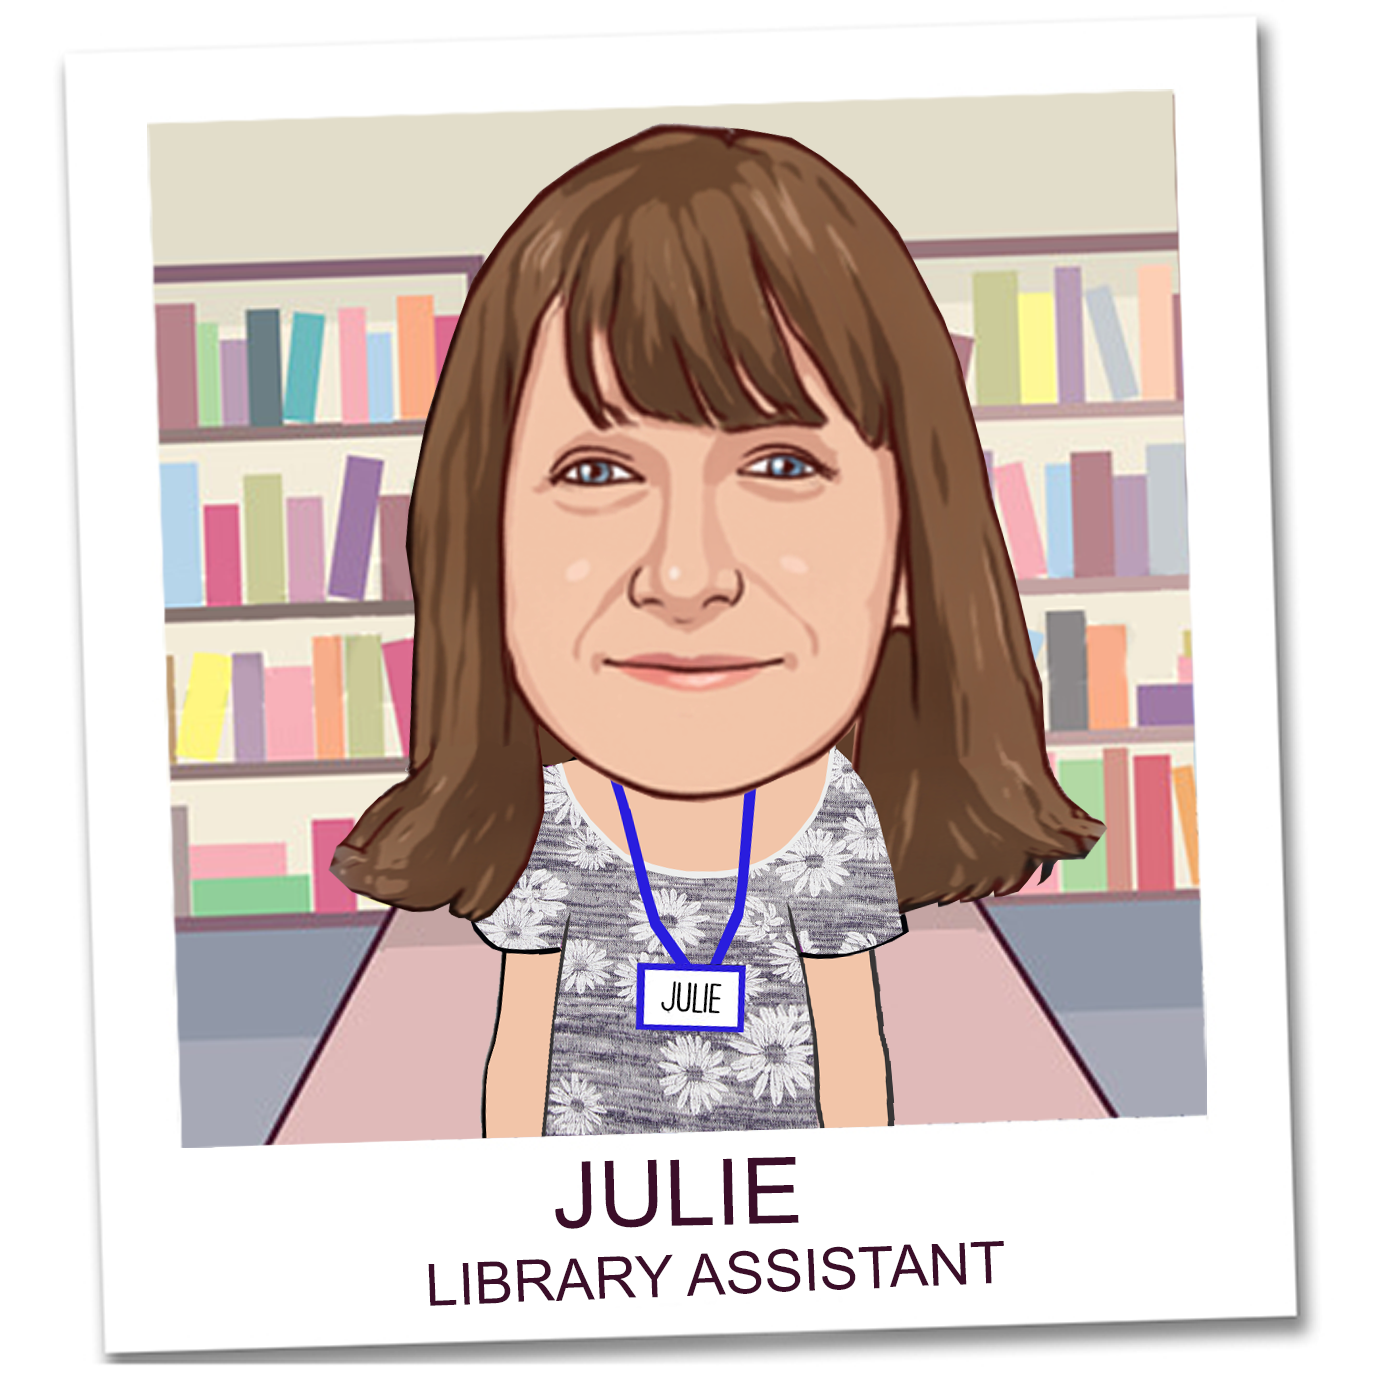 Julie, Library Assistant